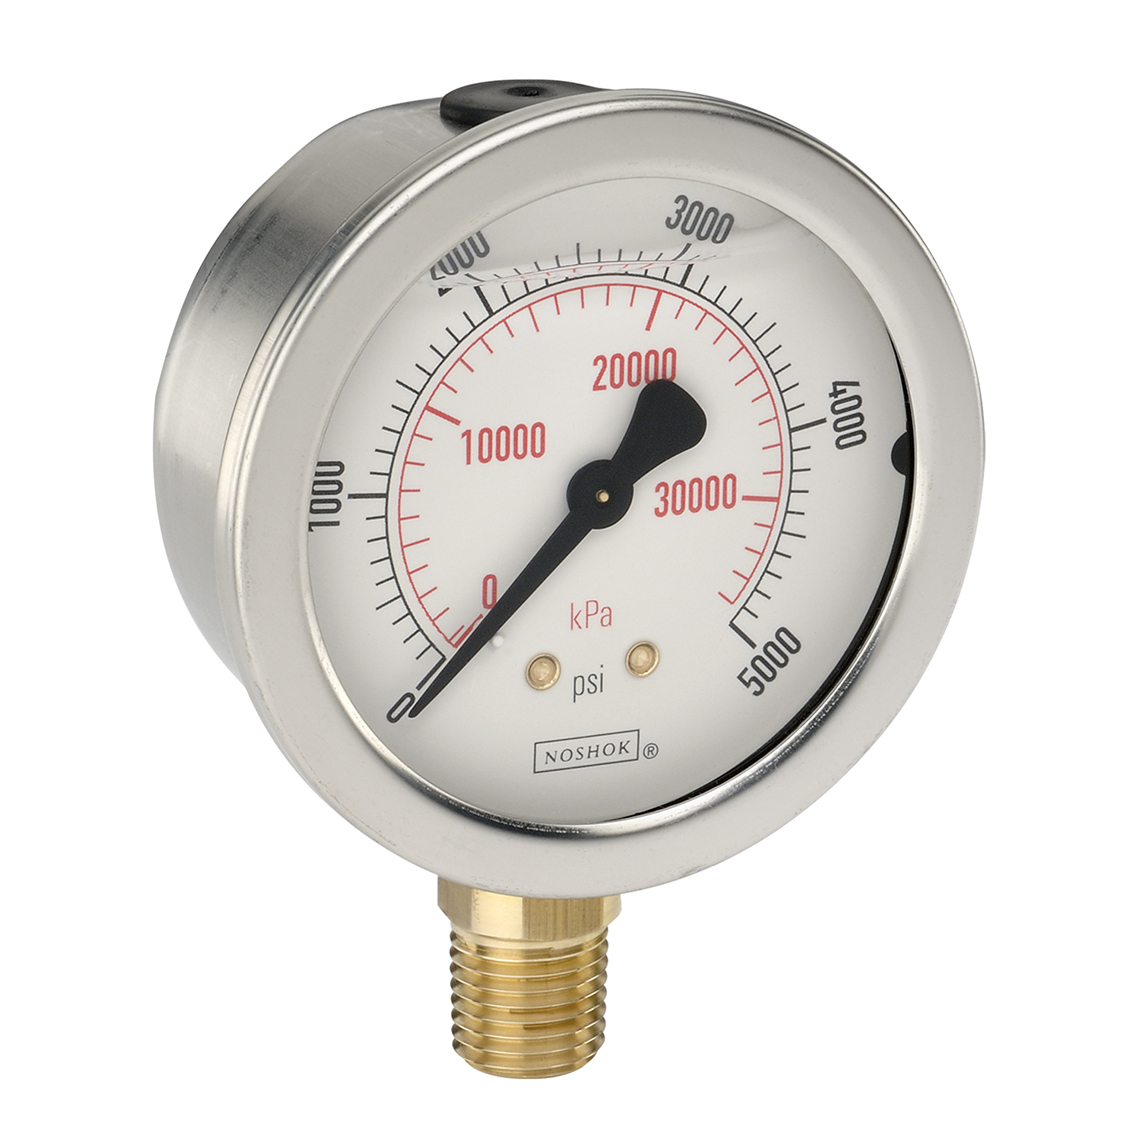 25-901-1500-psi/kPa-GY40 900 Series ABS and Stainless Steel Liquid Filled Pressure Gauges